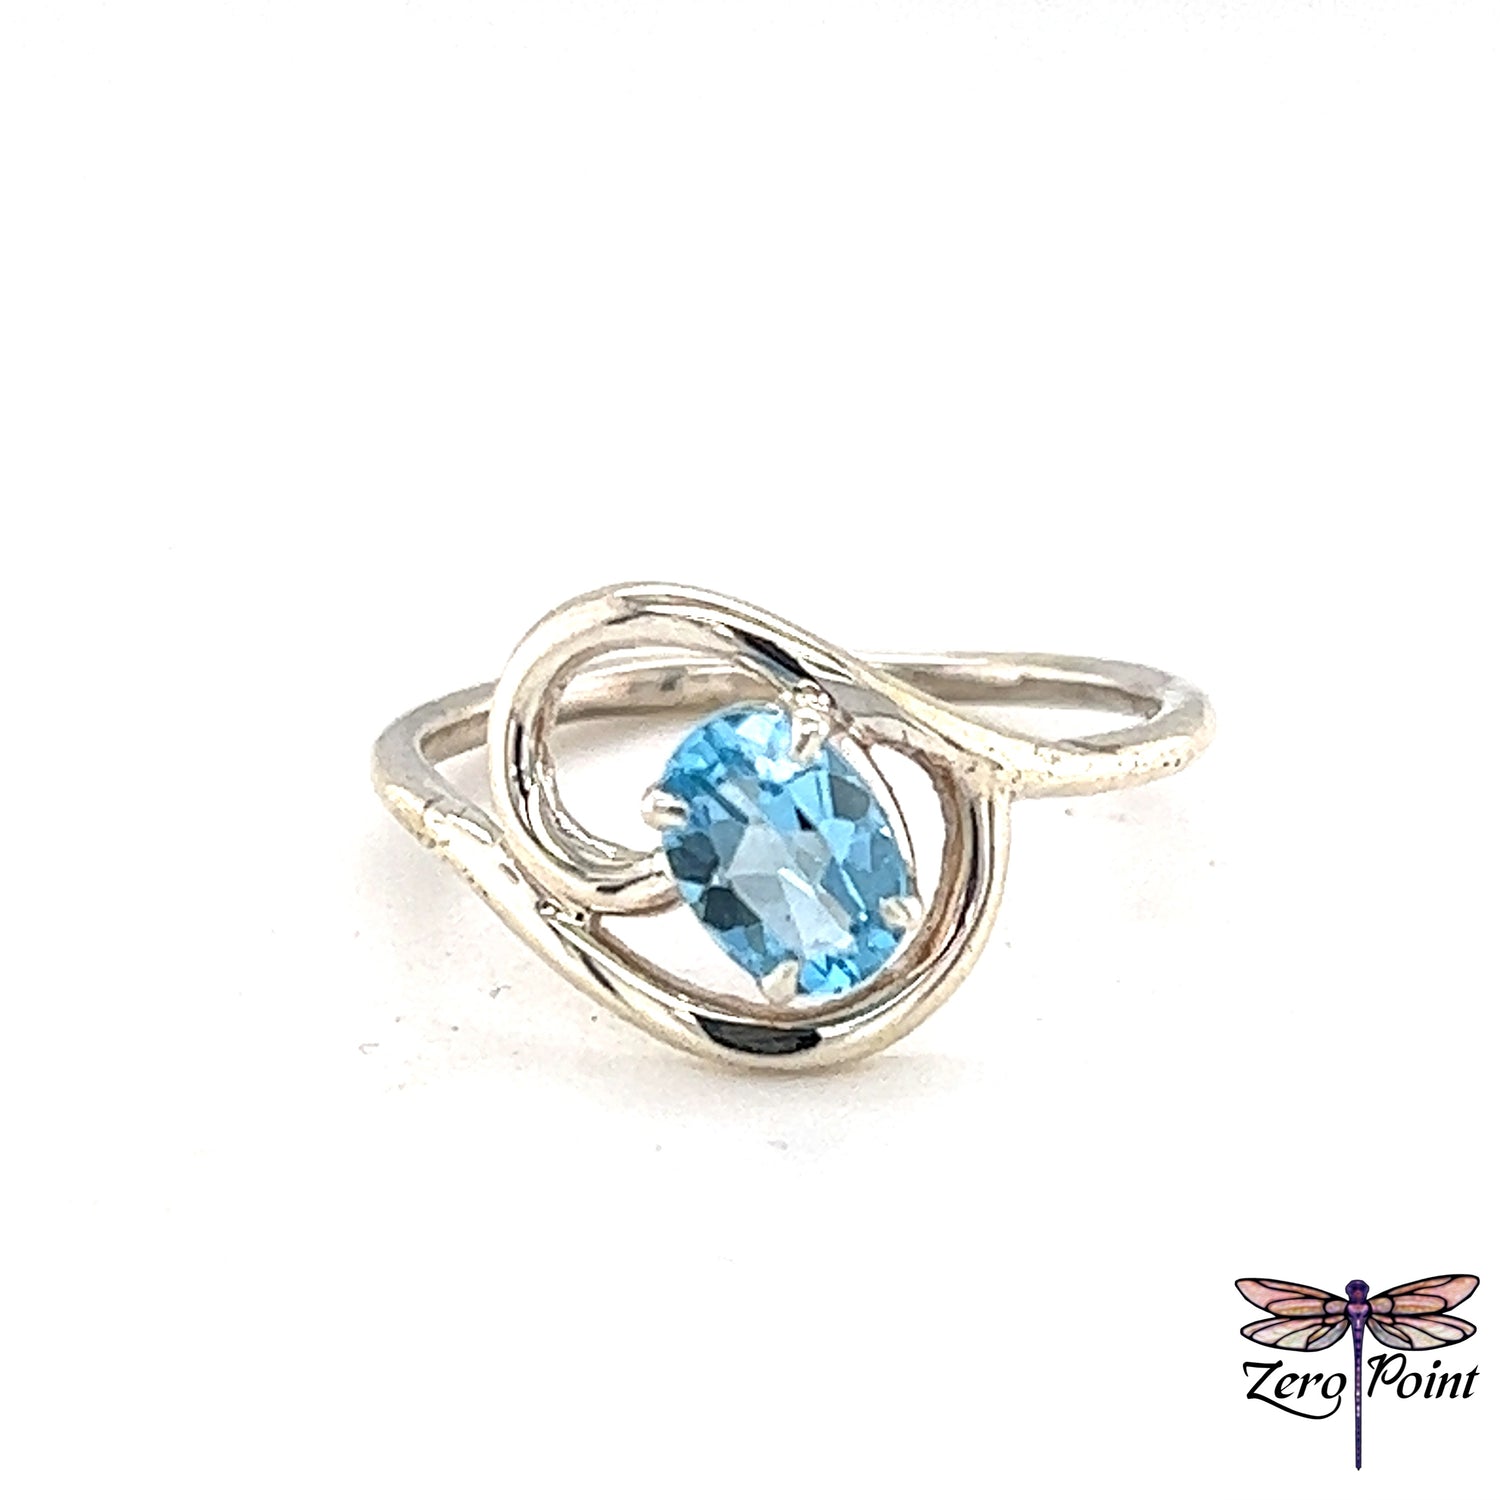 Faceted Oval Cut Blue Topaz Ring - Zero Point Crystals